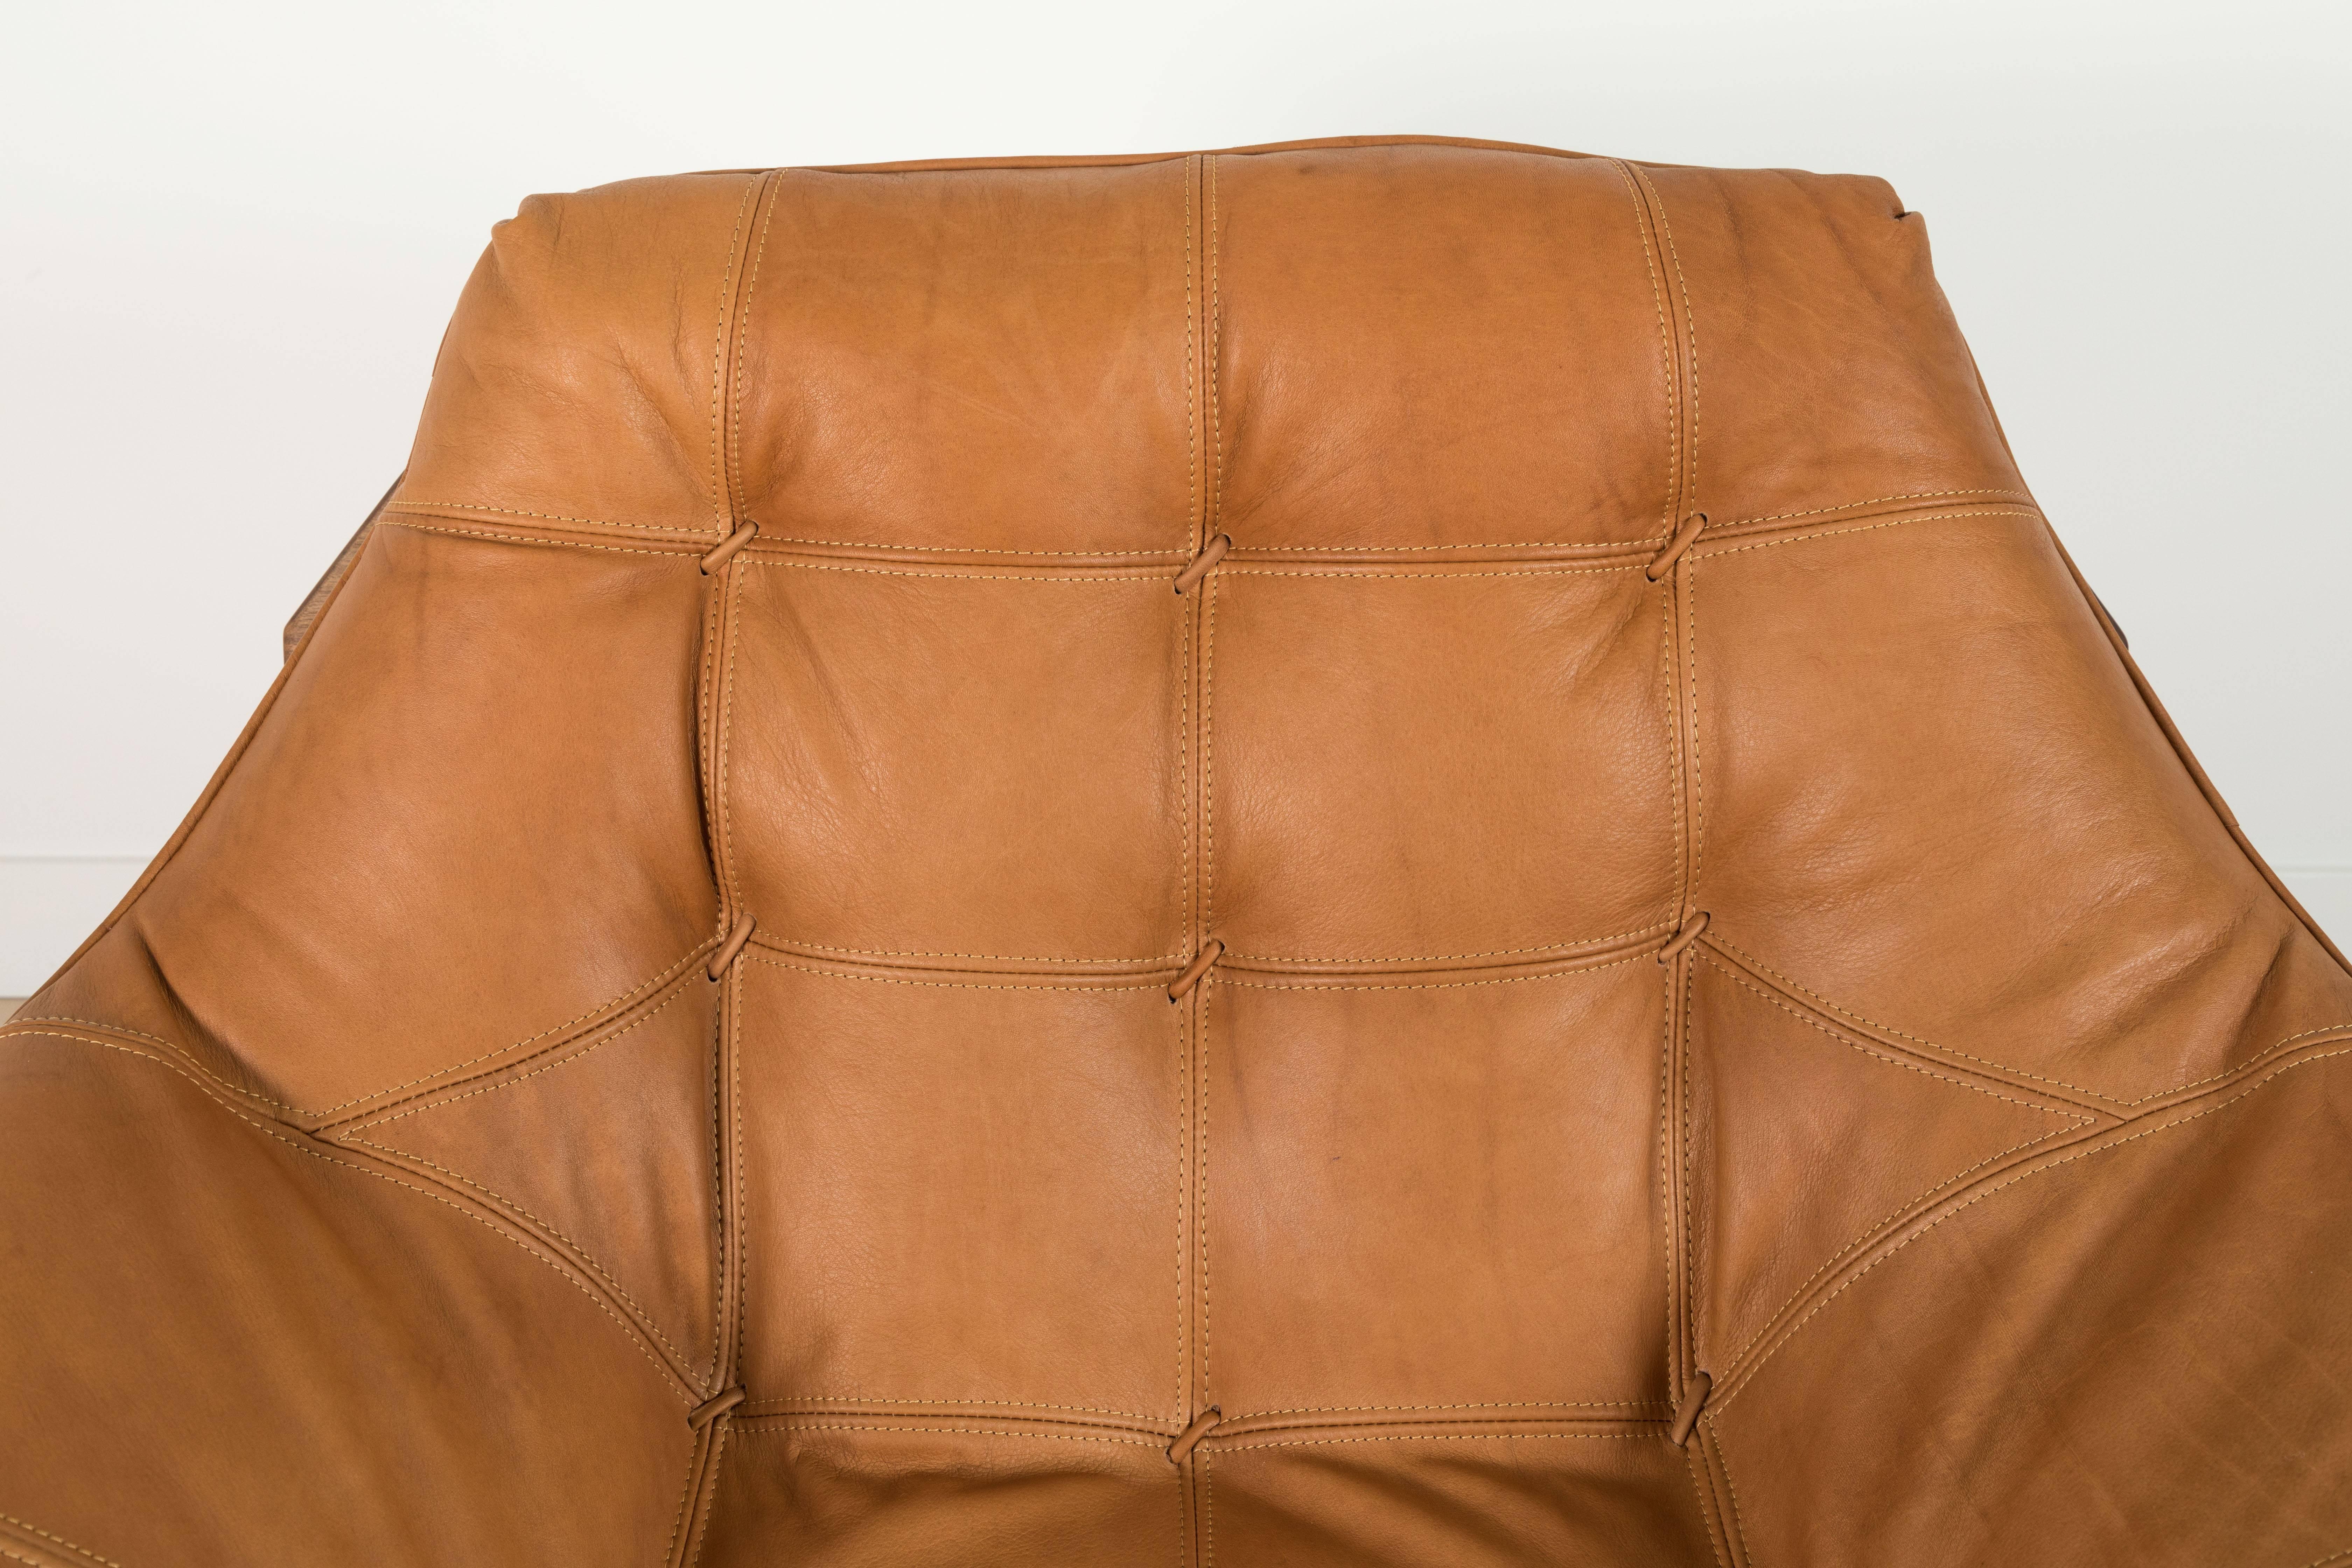 Contemporary Pair of Leather and Oiled Walnut Ojai Lounge Chairs by Lawson-Fenning